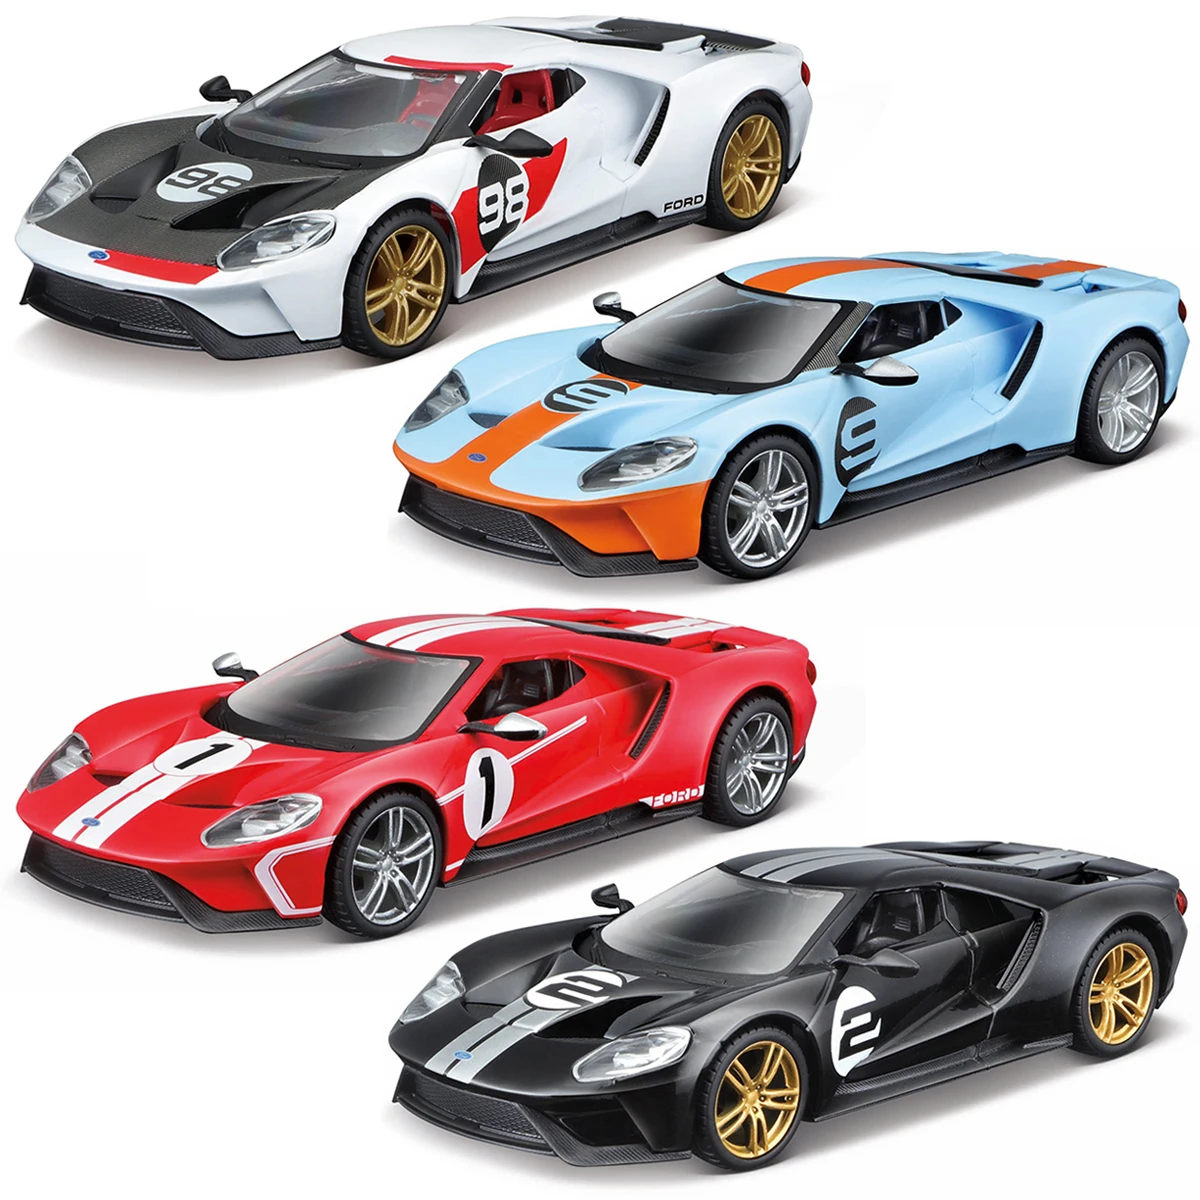 Bburago 1:32 Ford GT Heritage Edition Static Die Cast Vehicles Collectible Model Car Toys